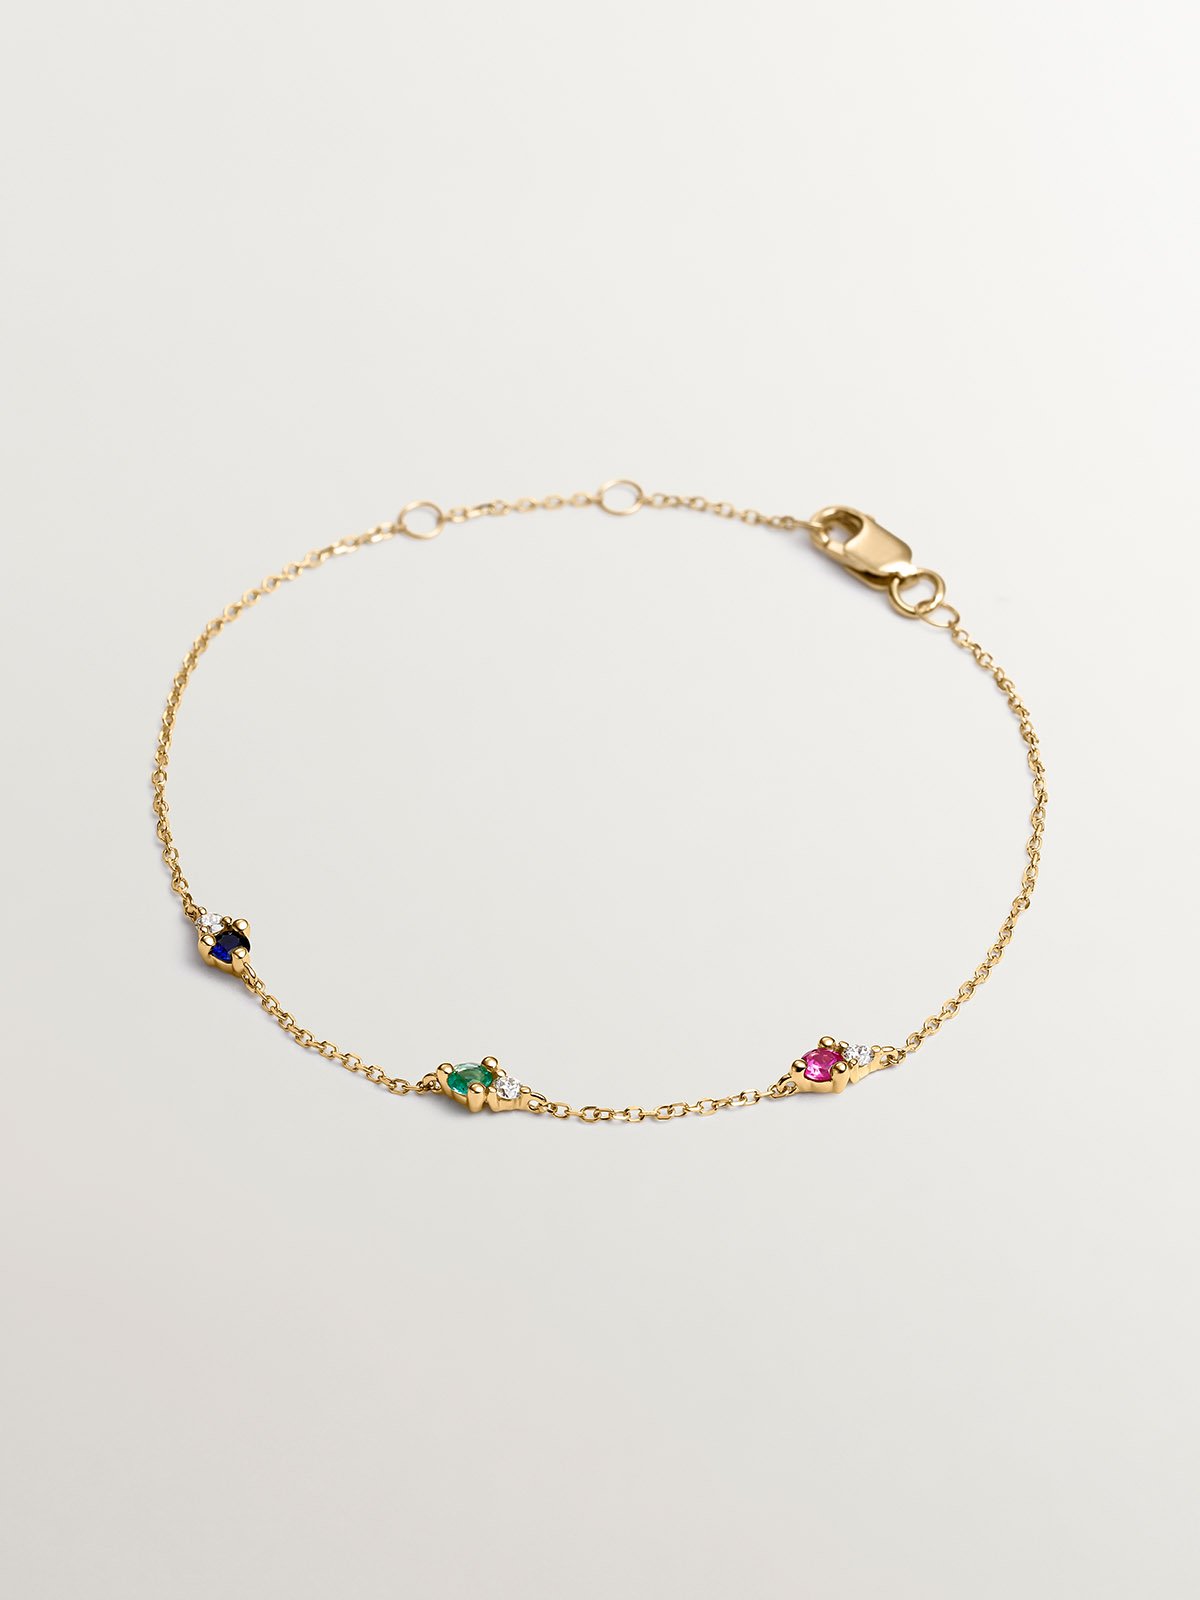 9K yellow gold bracelet with sapphire, emerald, ruby, and diamonds.